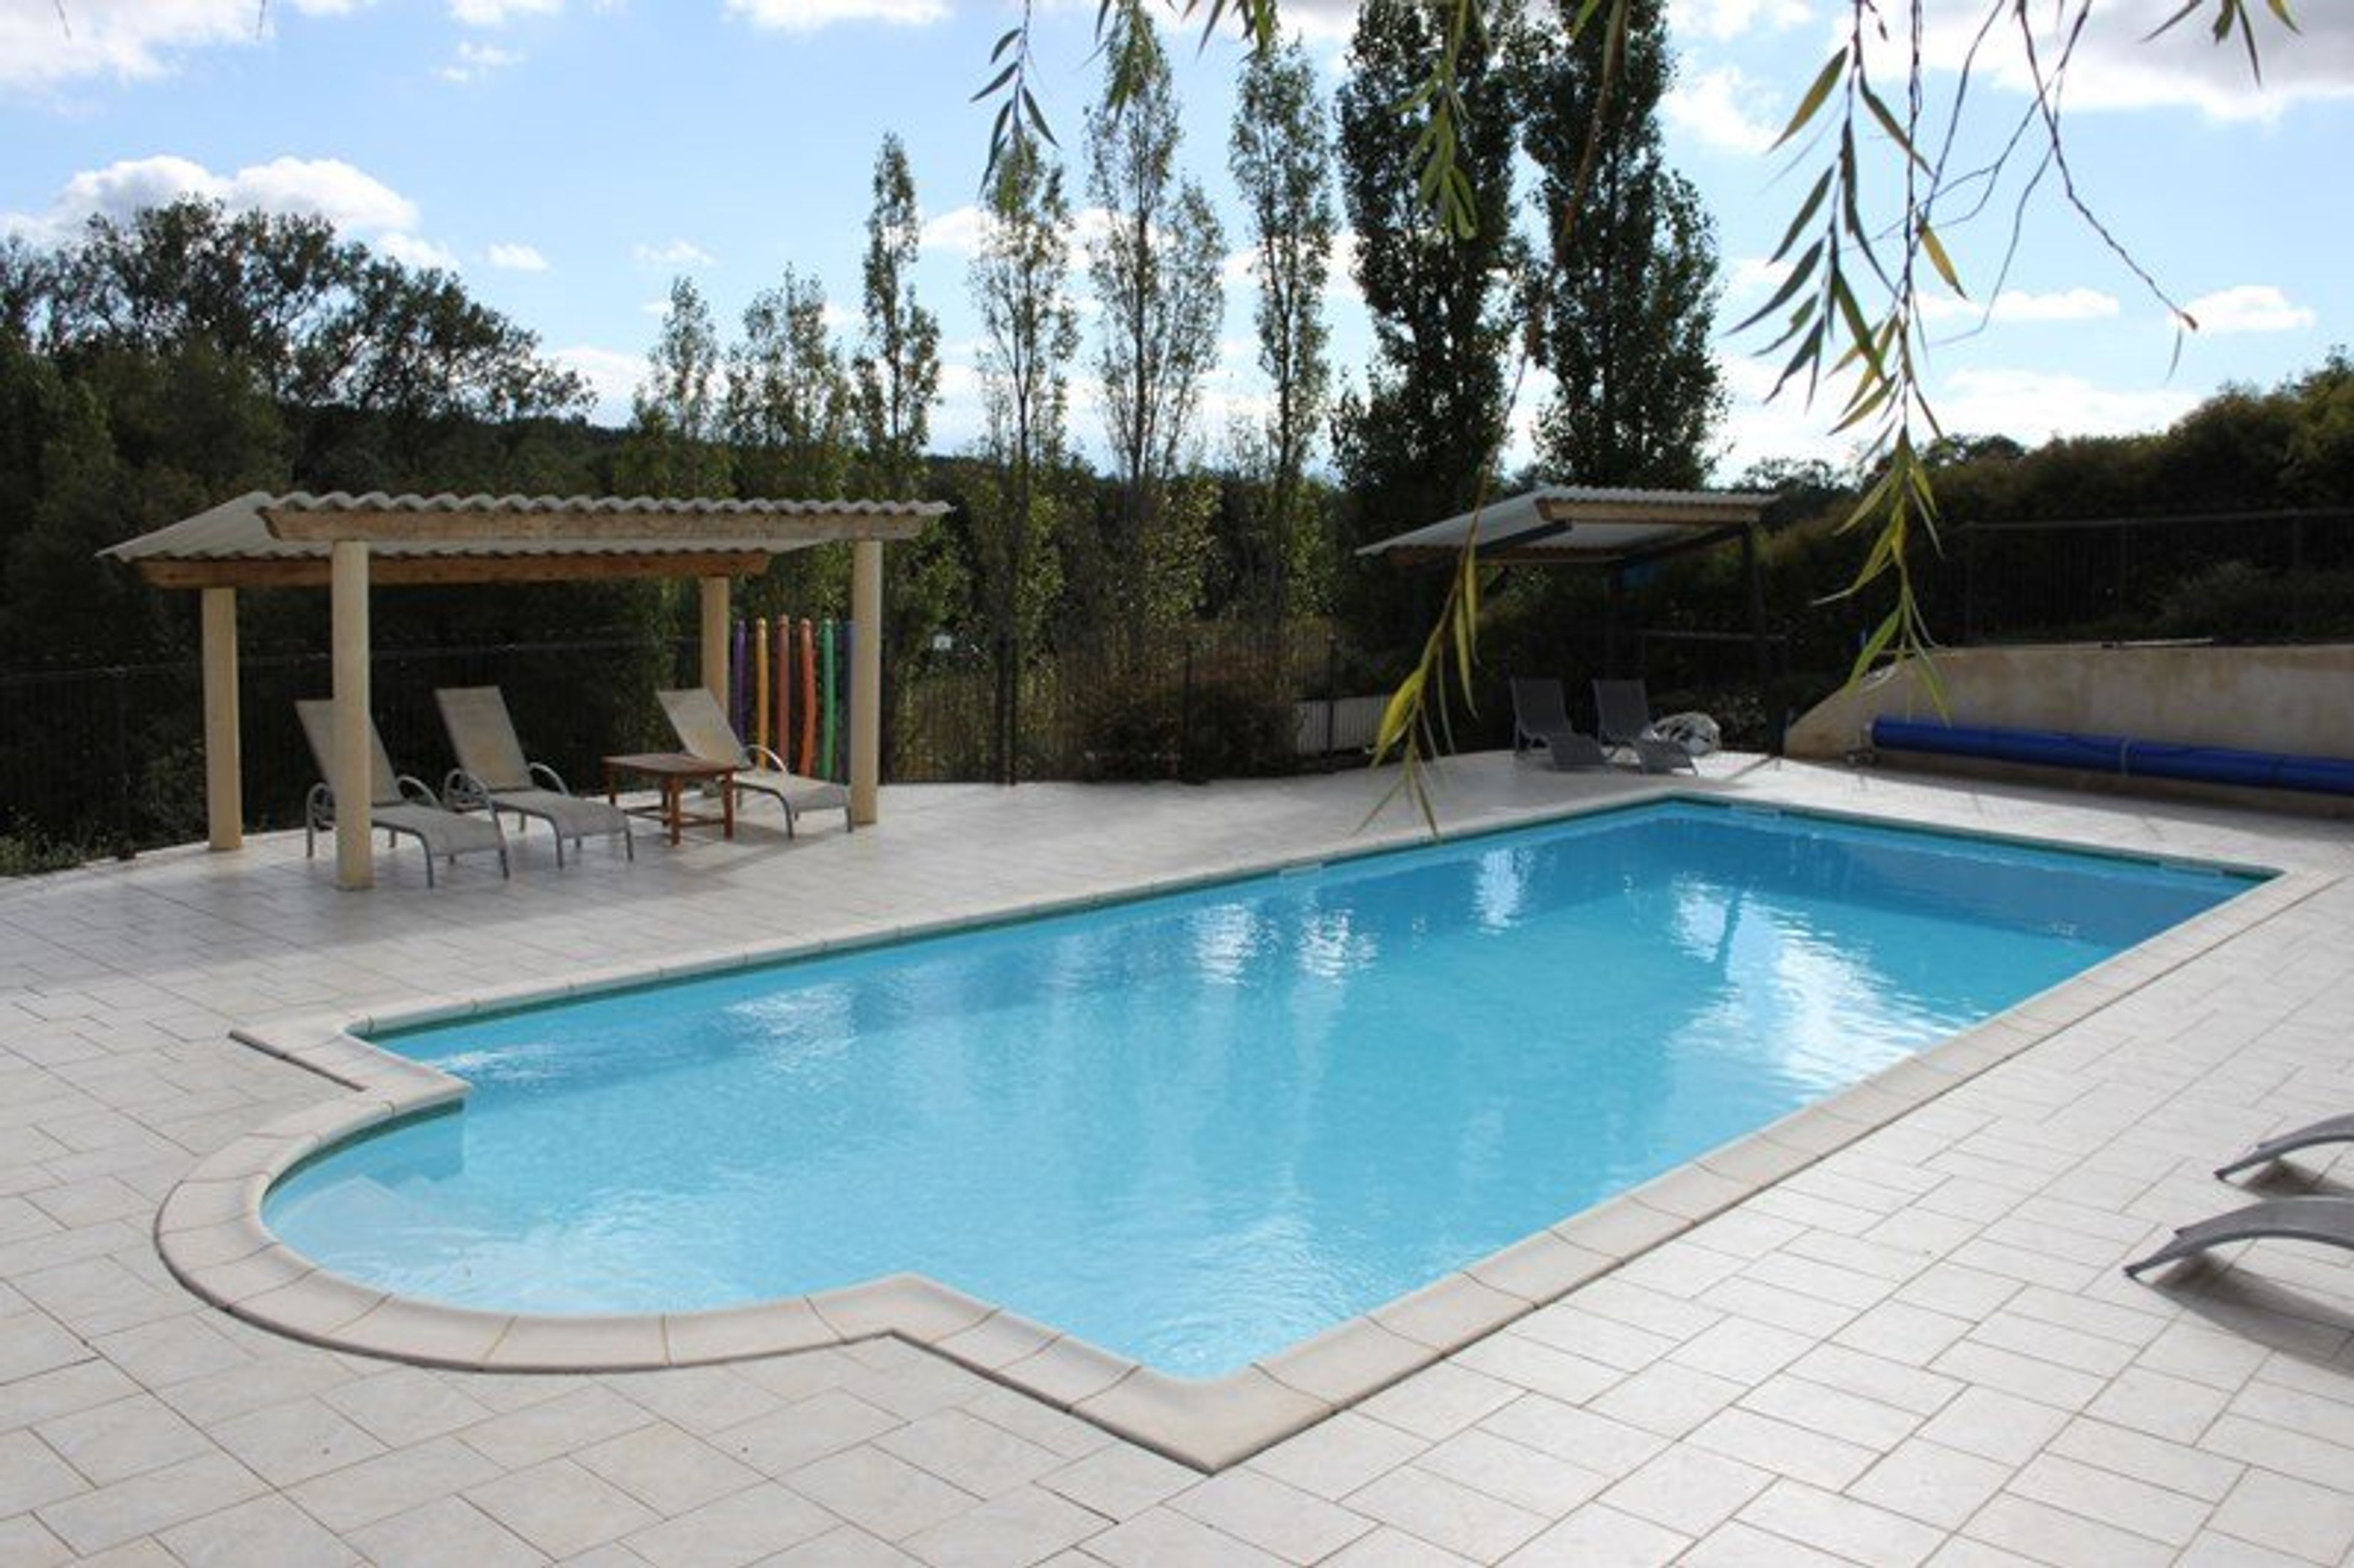 Heated 12m swimming pool (fully enclosed)